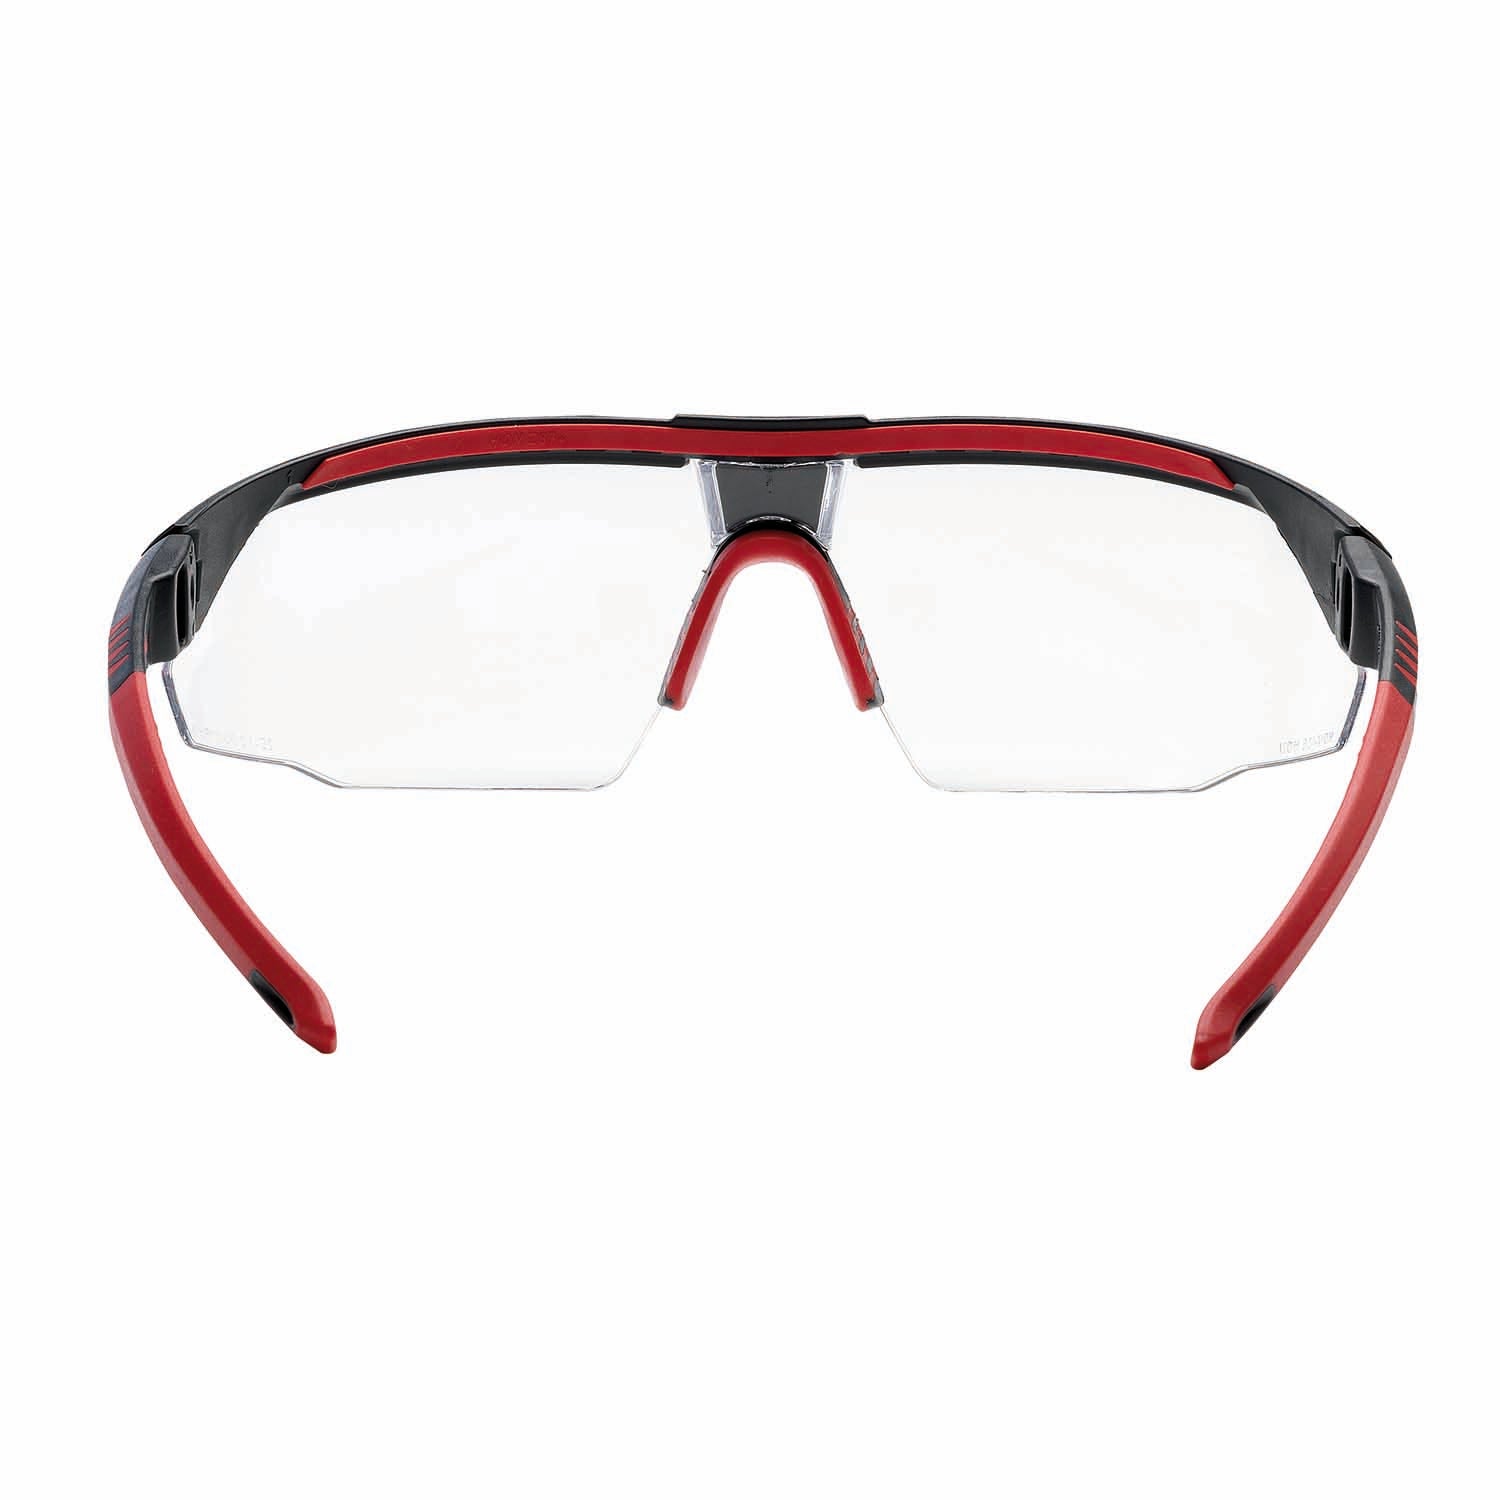 avatar Honeywell  safety spectacles clear lens black red frame